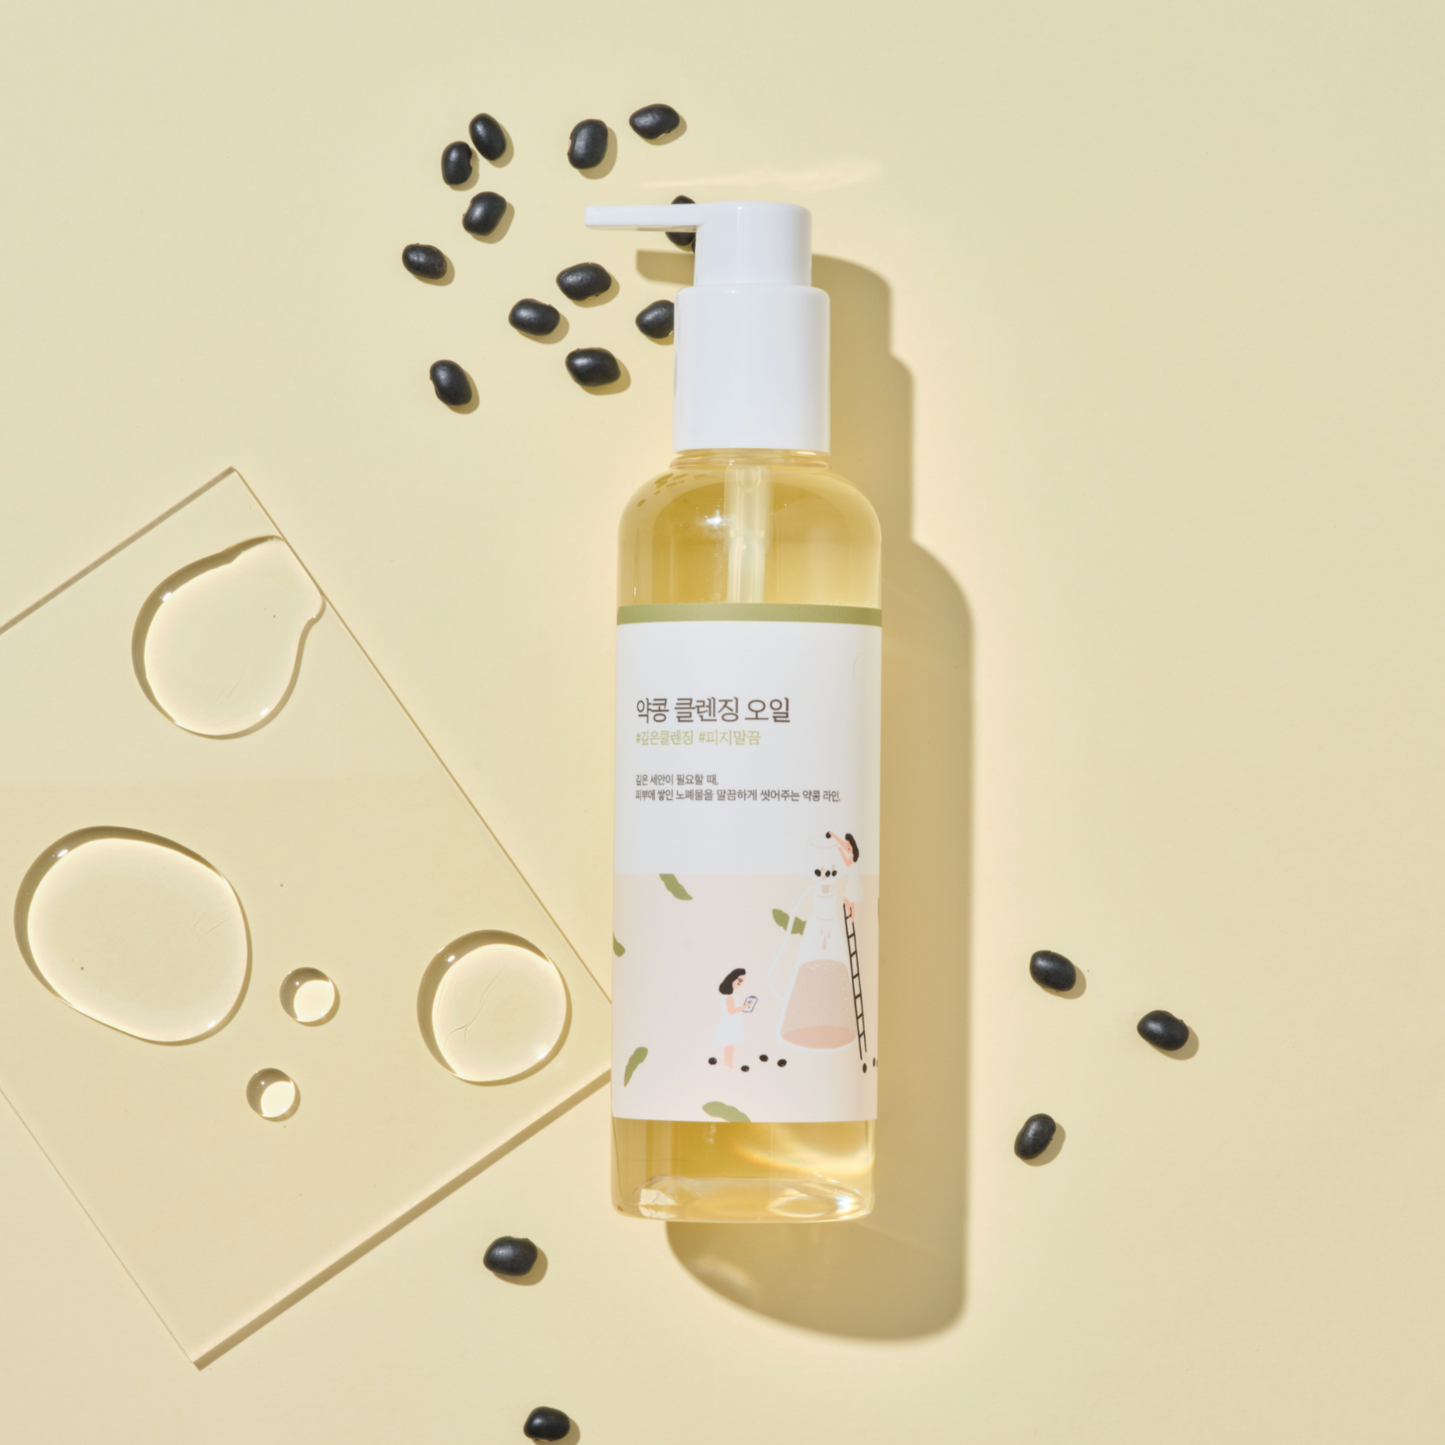 ROUND LAB Soybean Cleansing Oil